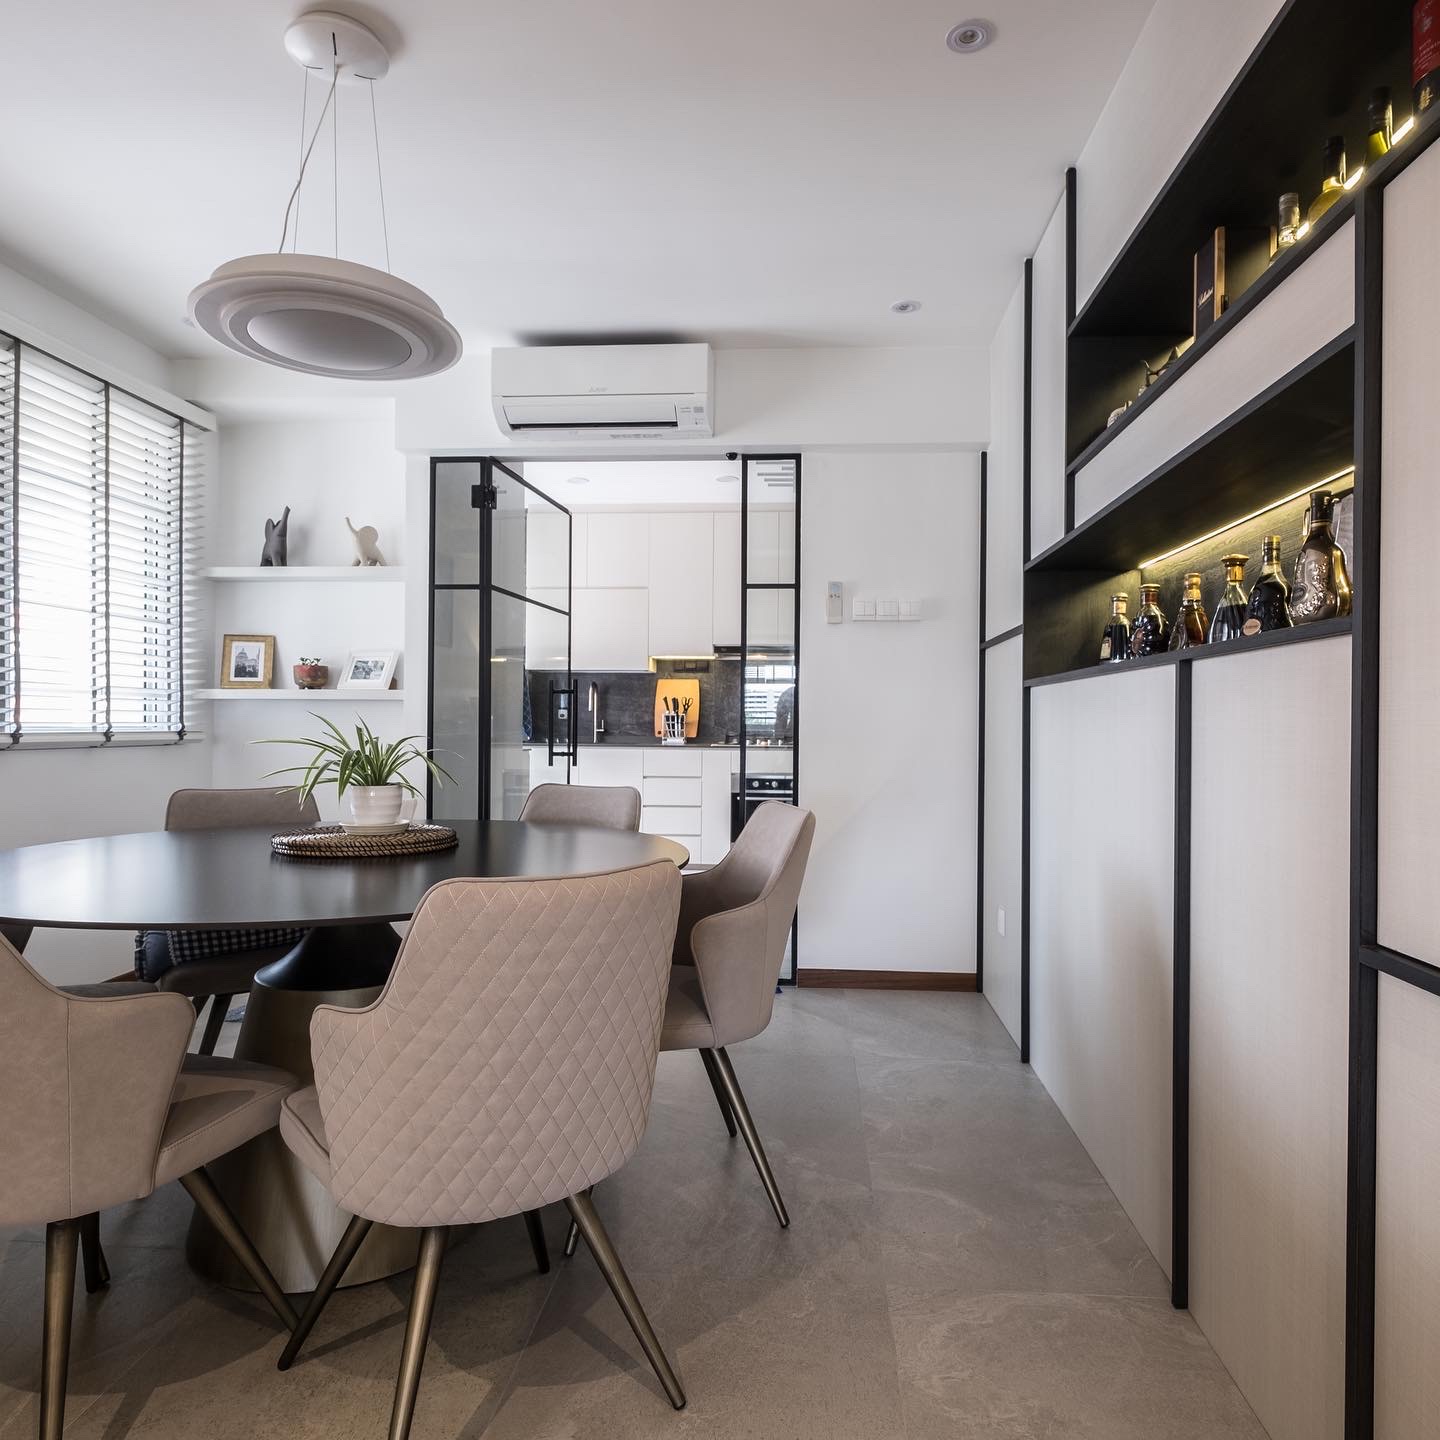 Contemporary, Modern, Others Design - Dining Room - HDB Executive Apartment - Design by United Team Lifestyle